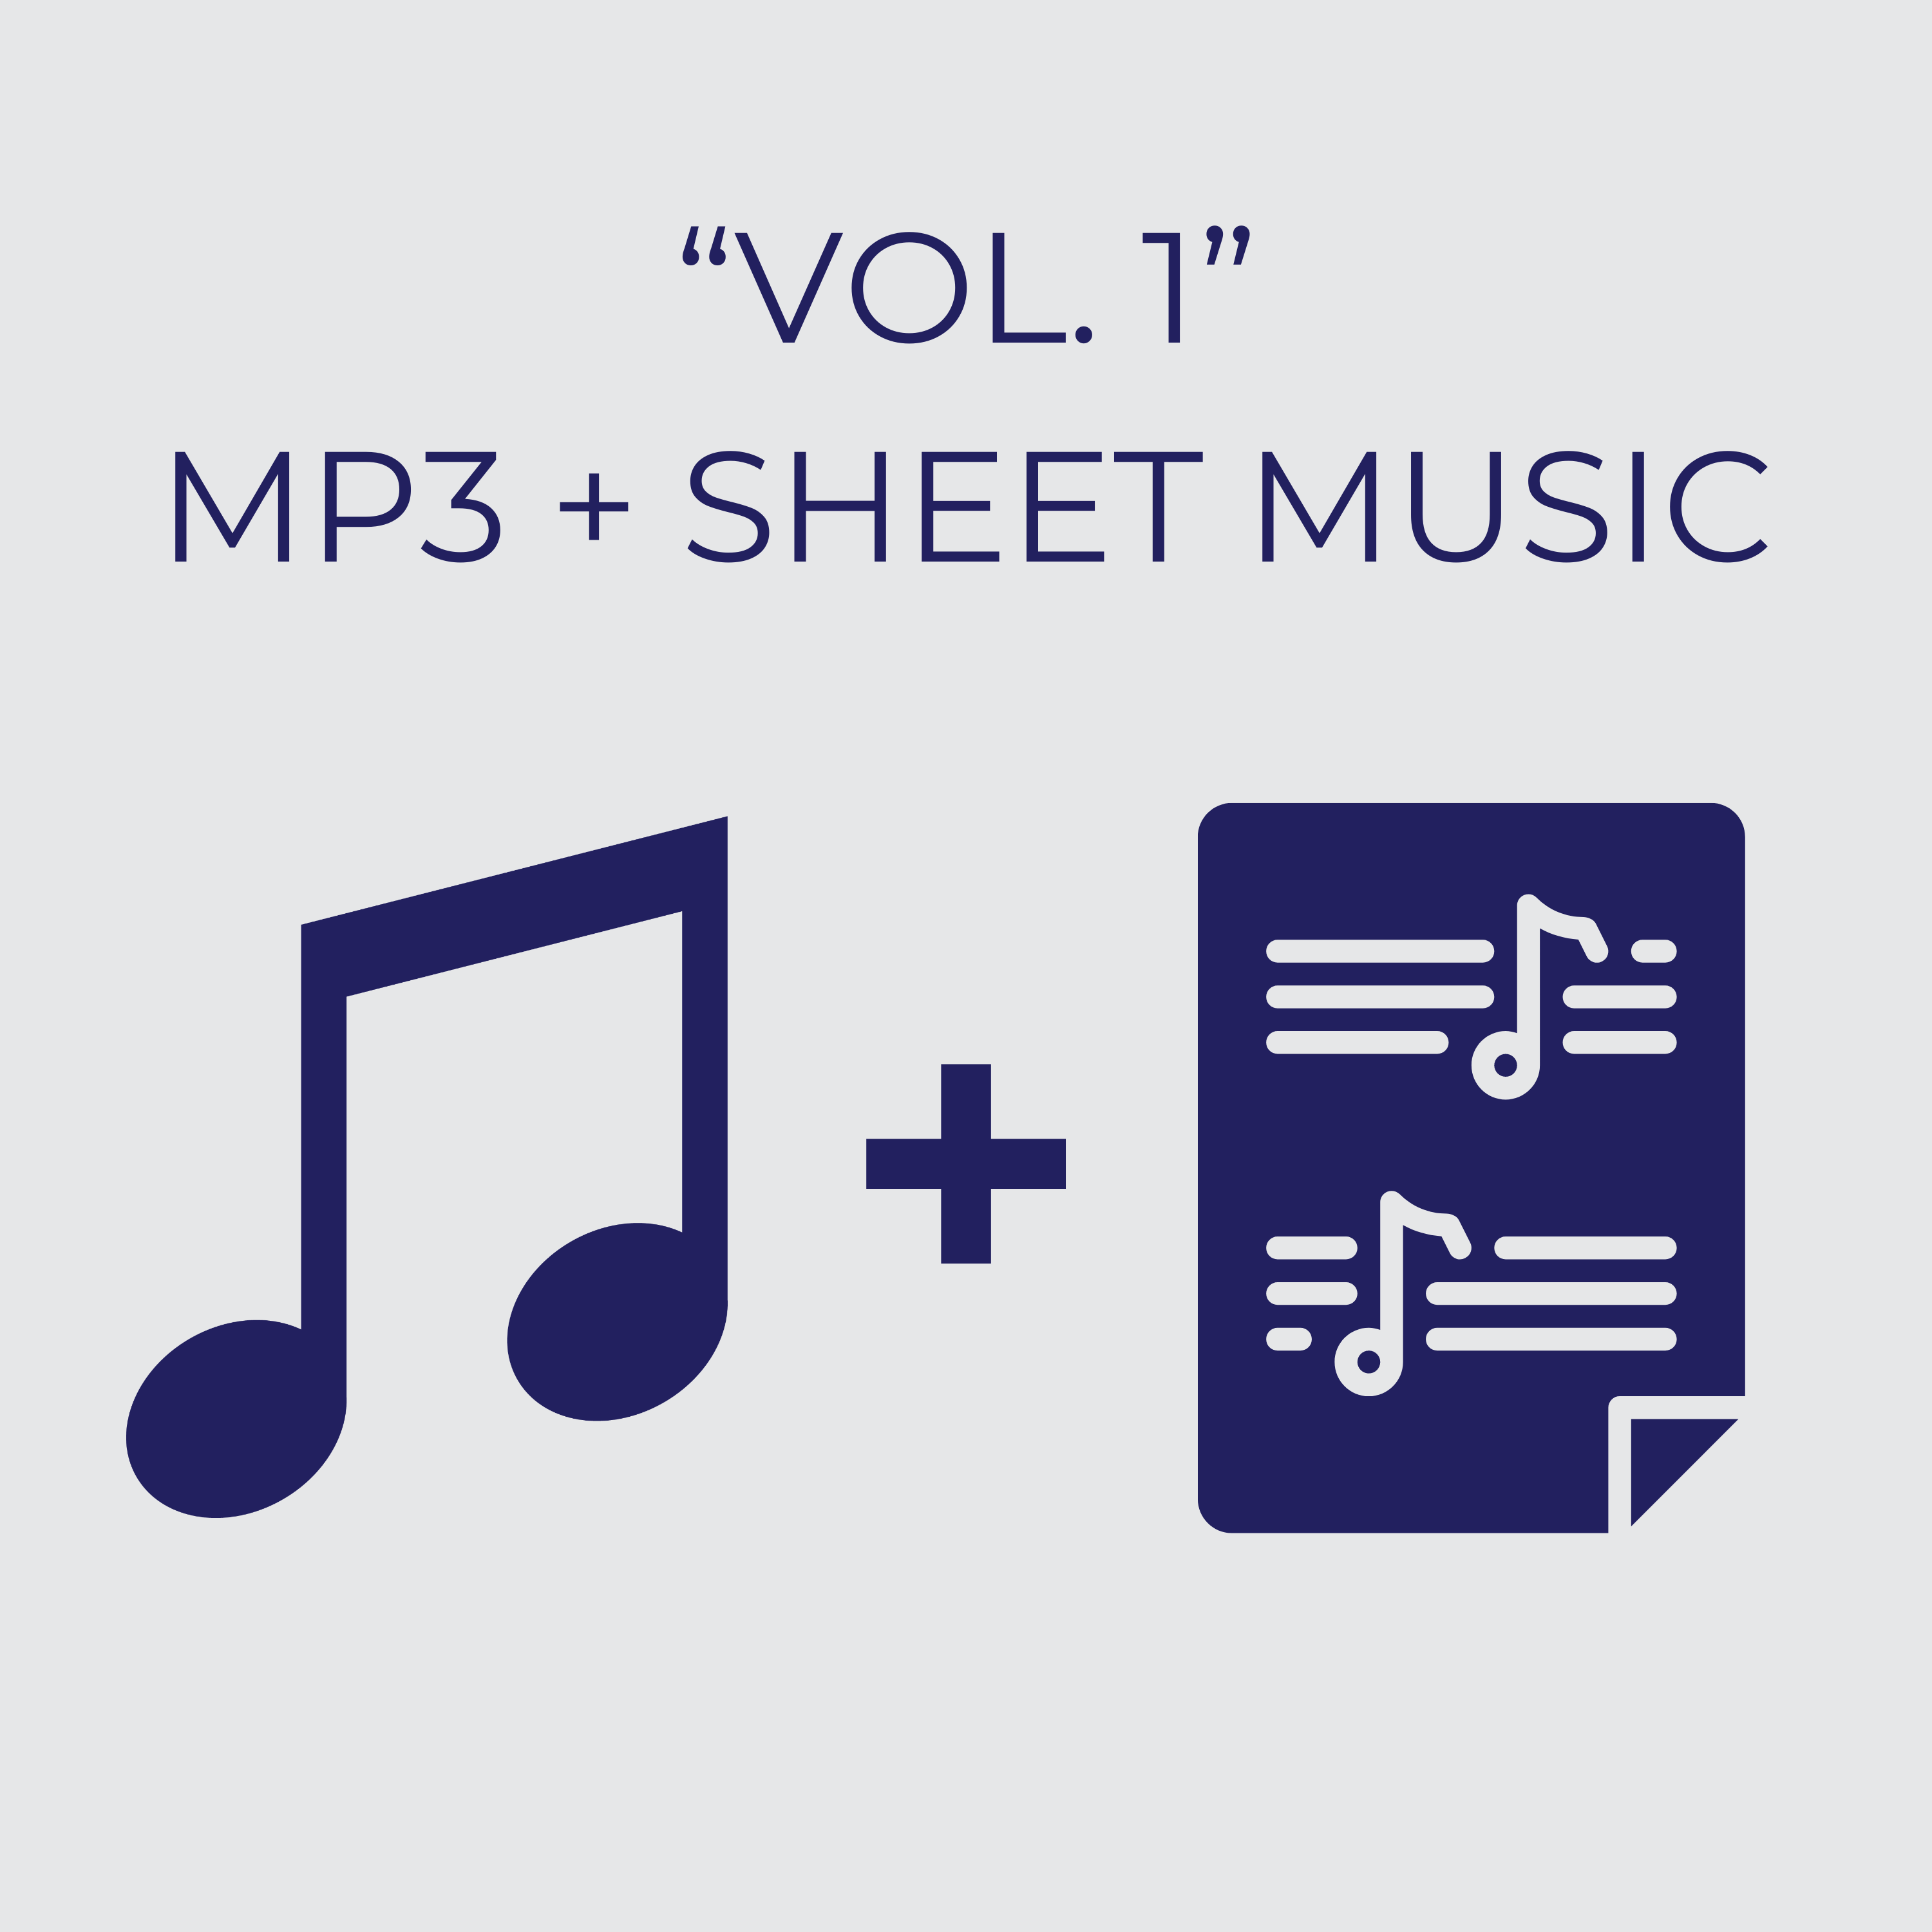 "The Collection, Vol. 1" MP3 and Sheet Music Bundle